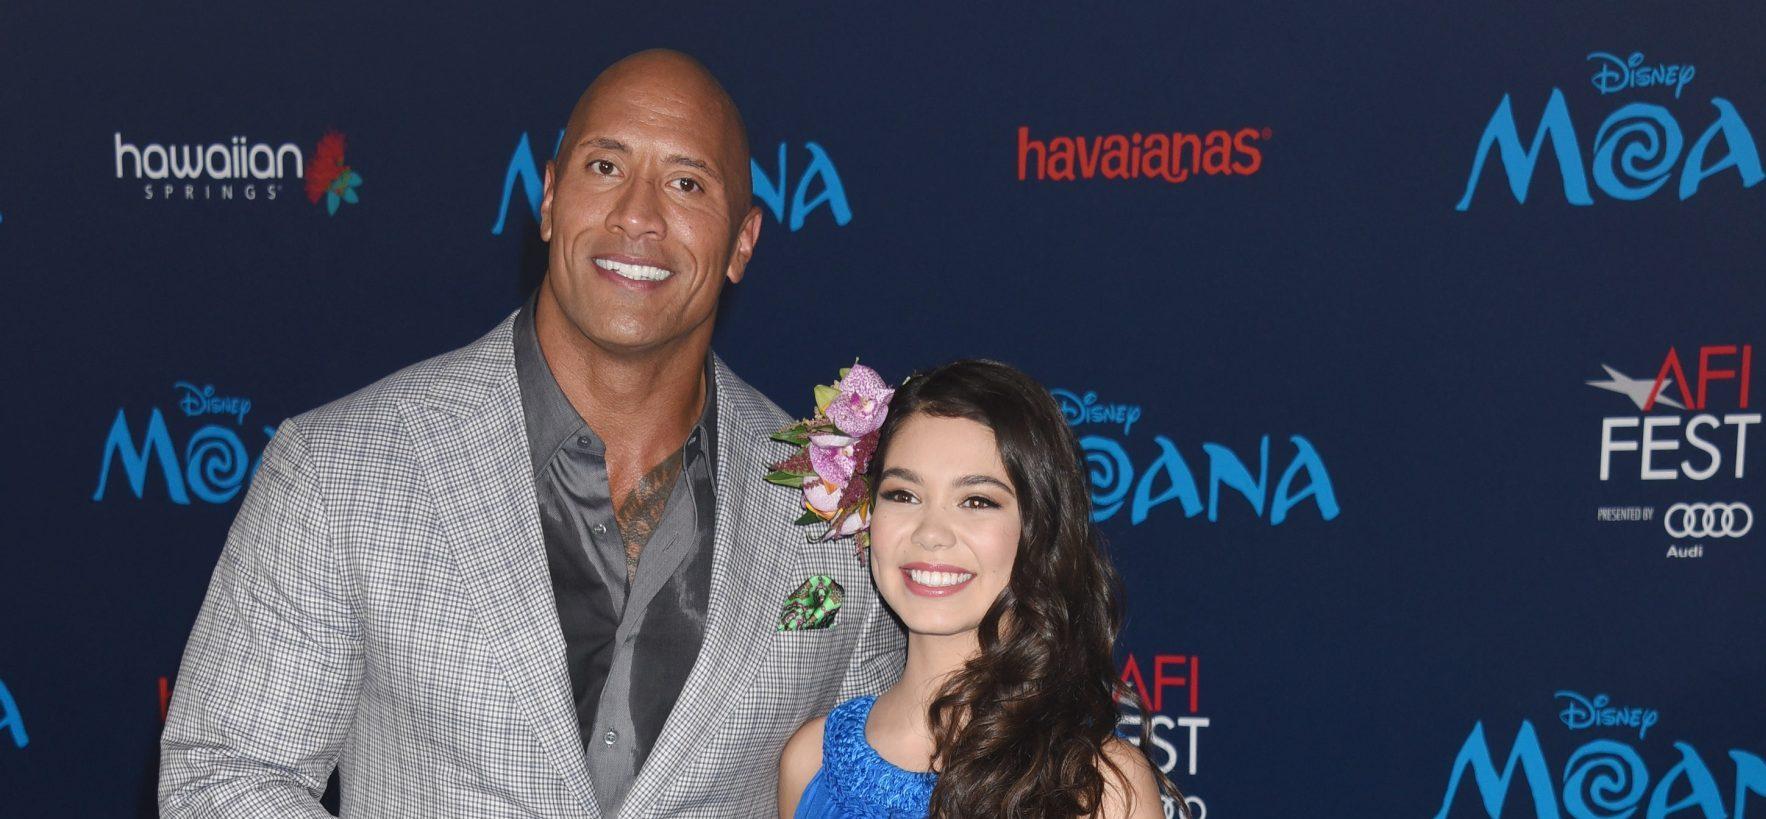 Dwayne ‘The Rock’ Johnson Confirms ‘Moana’ Live-Action Film Is In The Works